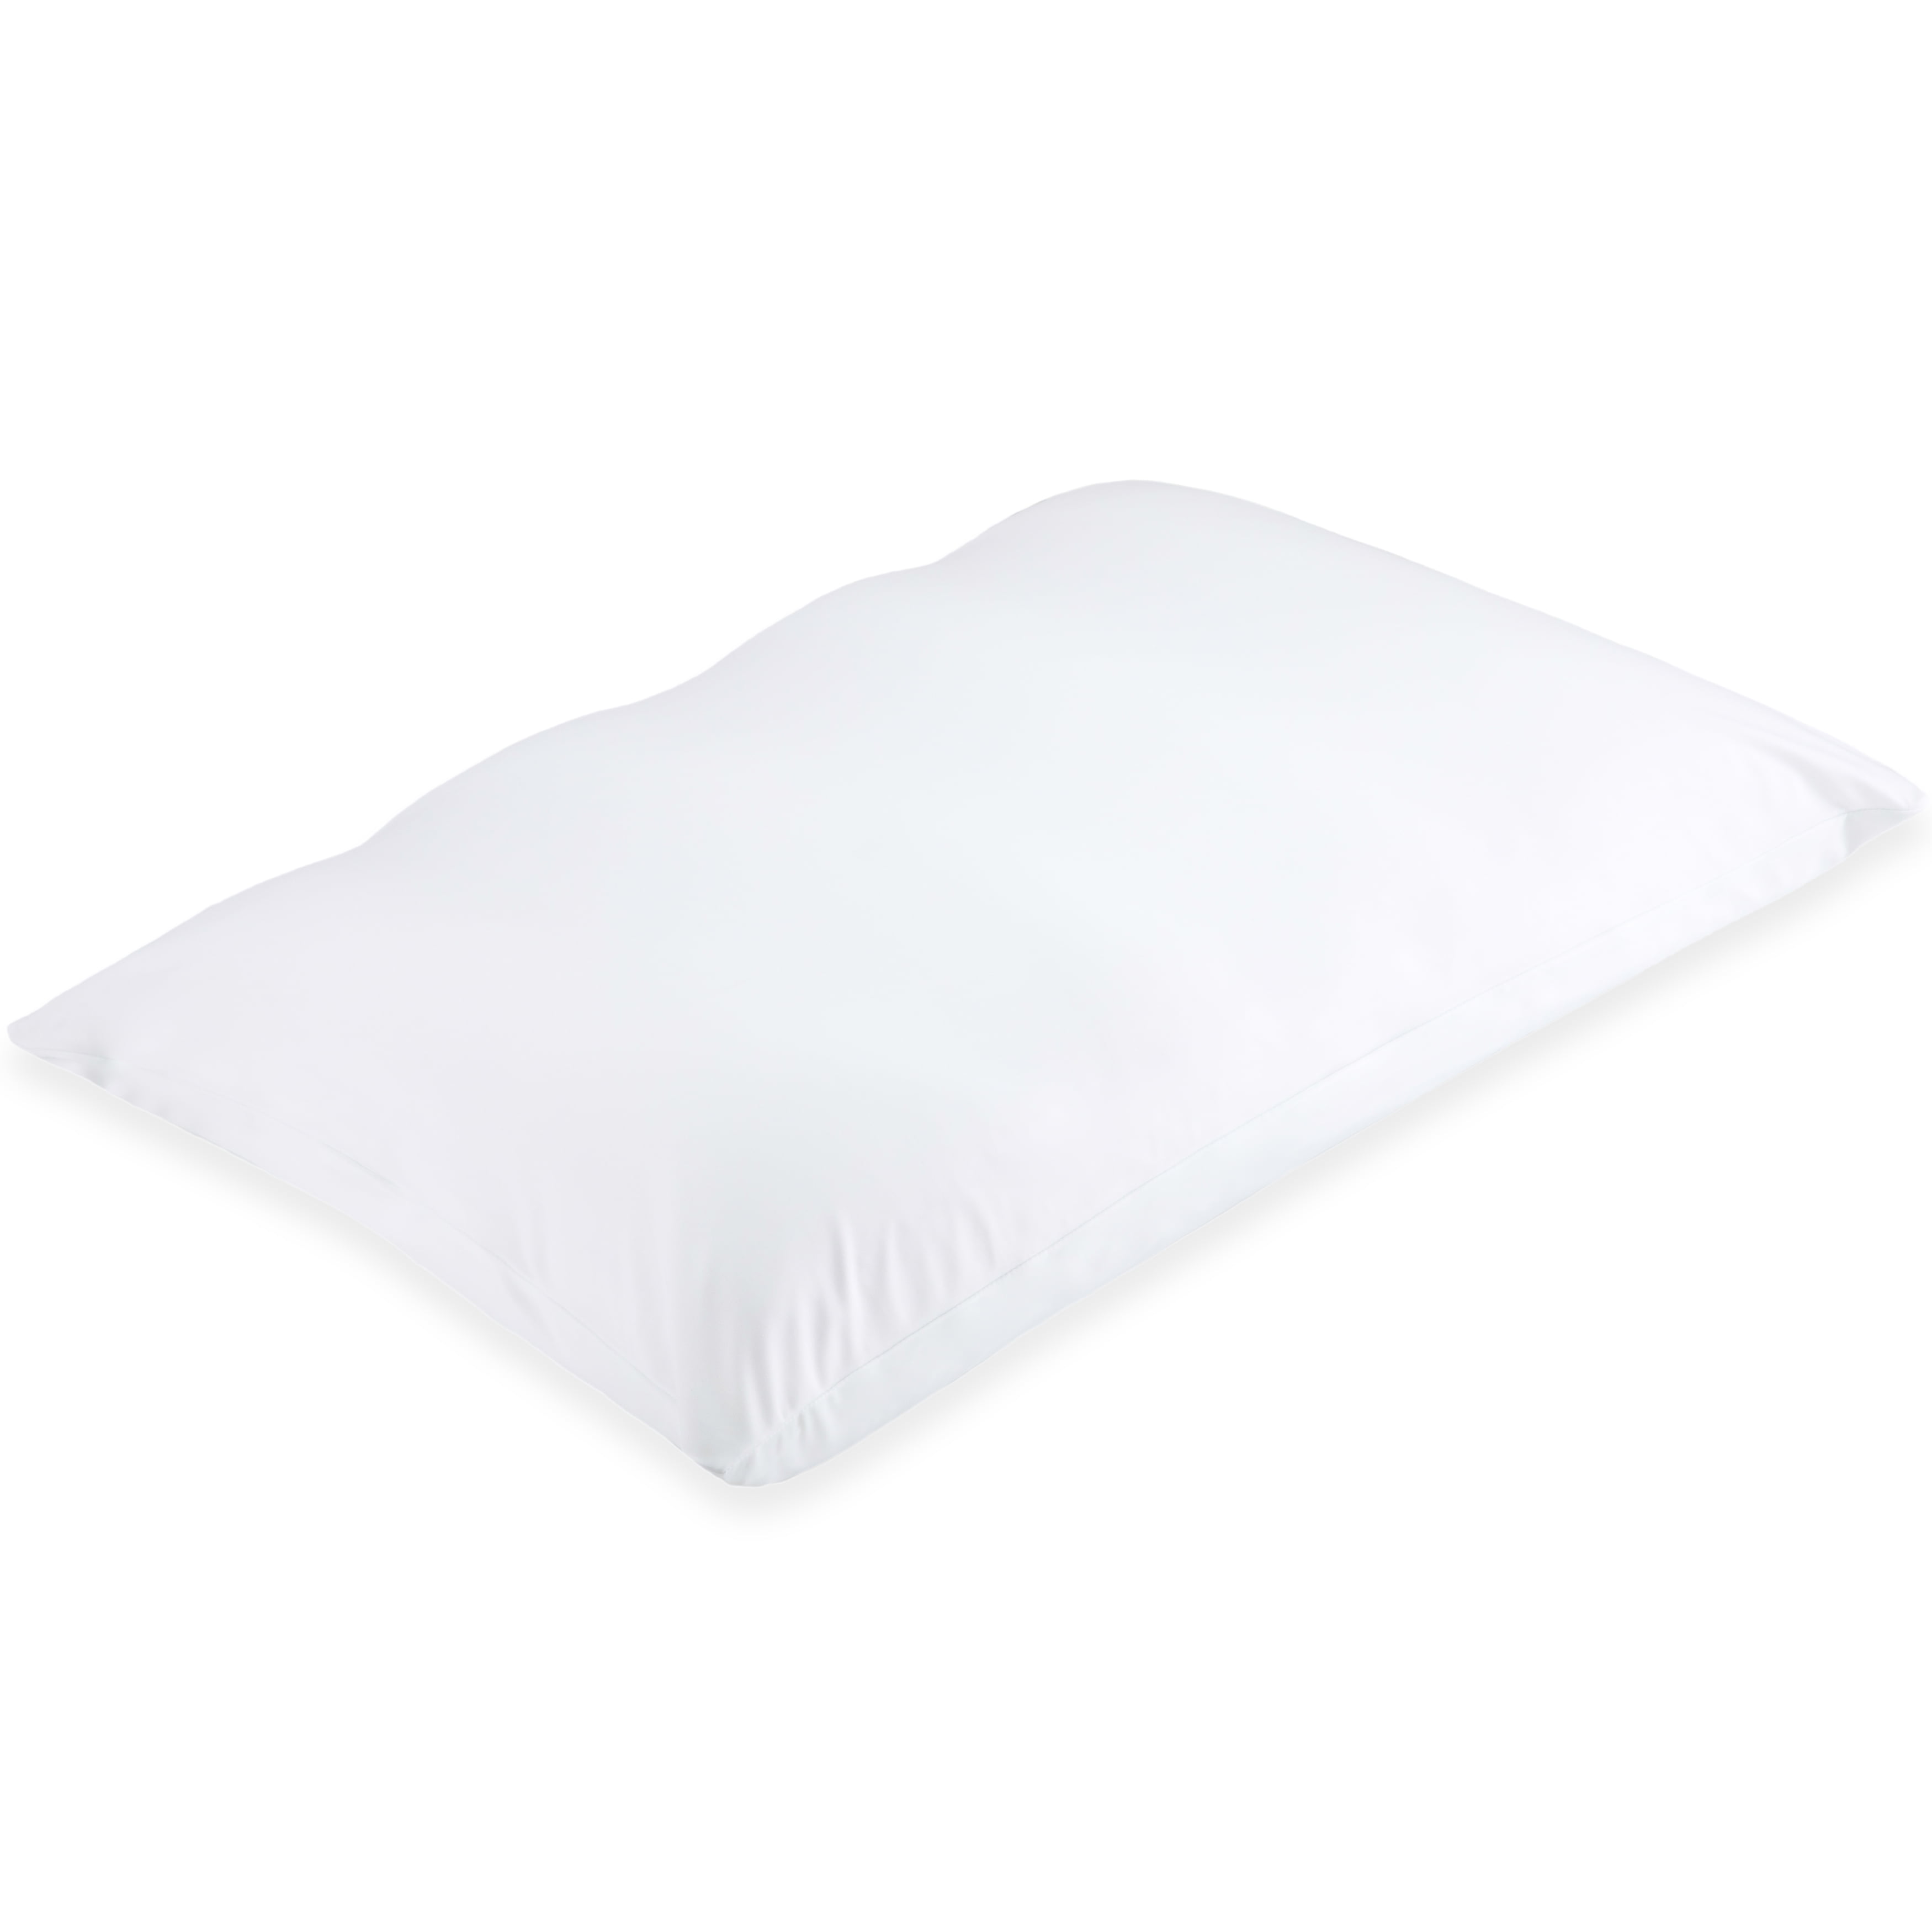 Details about   Hot Bamboo Memory Foam Bed Pillow King Size Hypoallergenic Cooling Comfort 